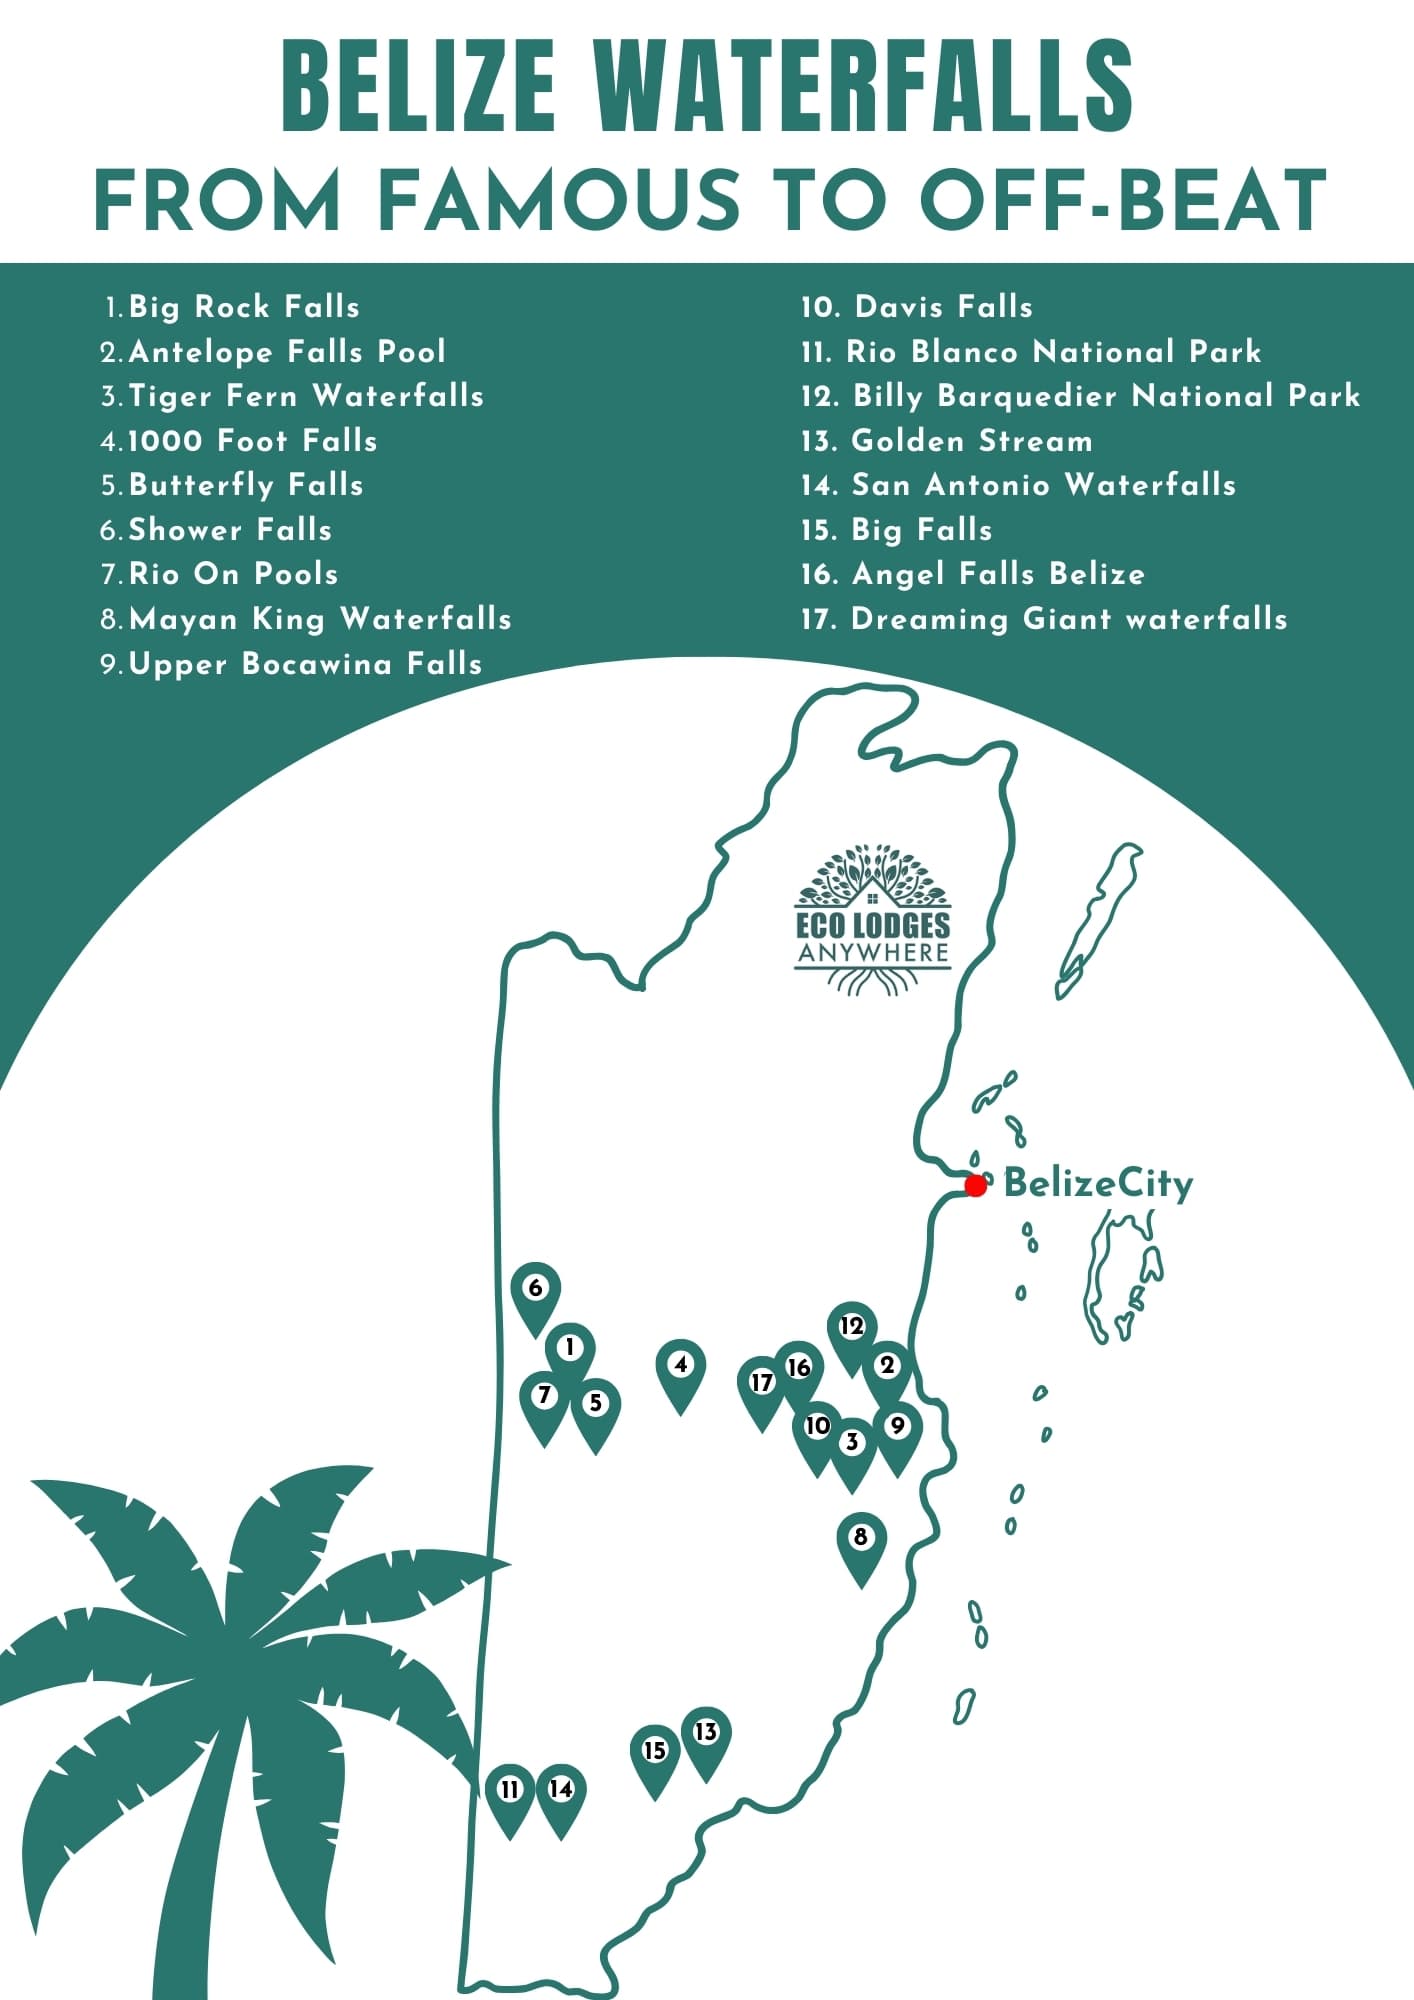 Map of Belize with pins for each waterfall listed.